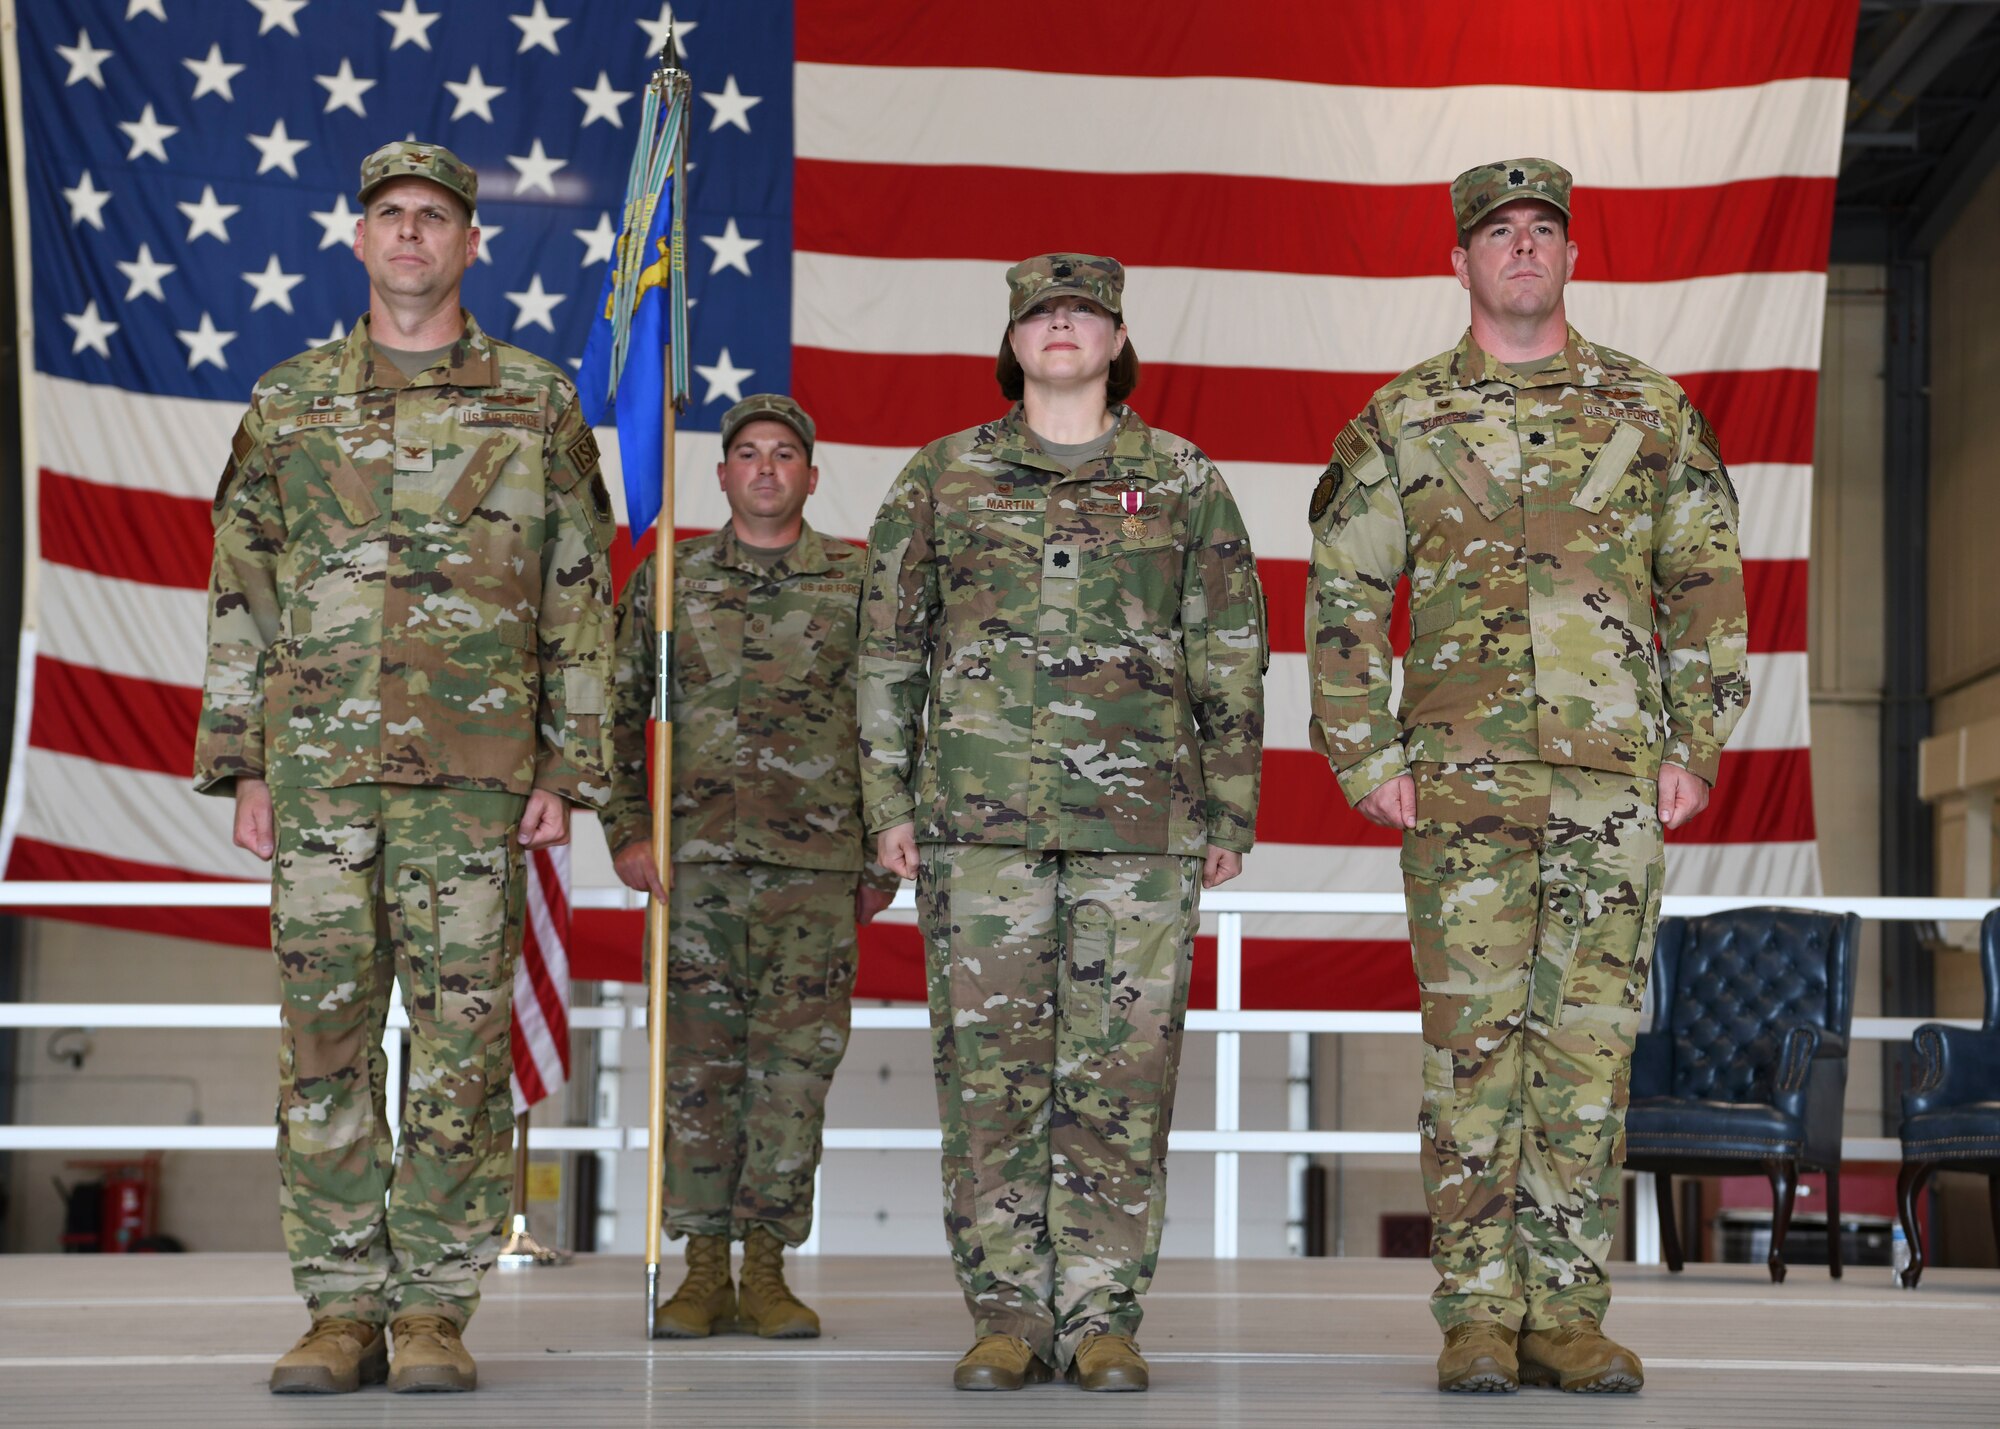 Four people in green uniforms stand together.